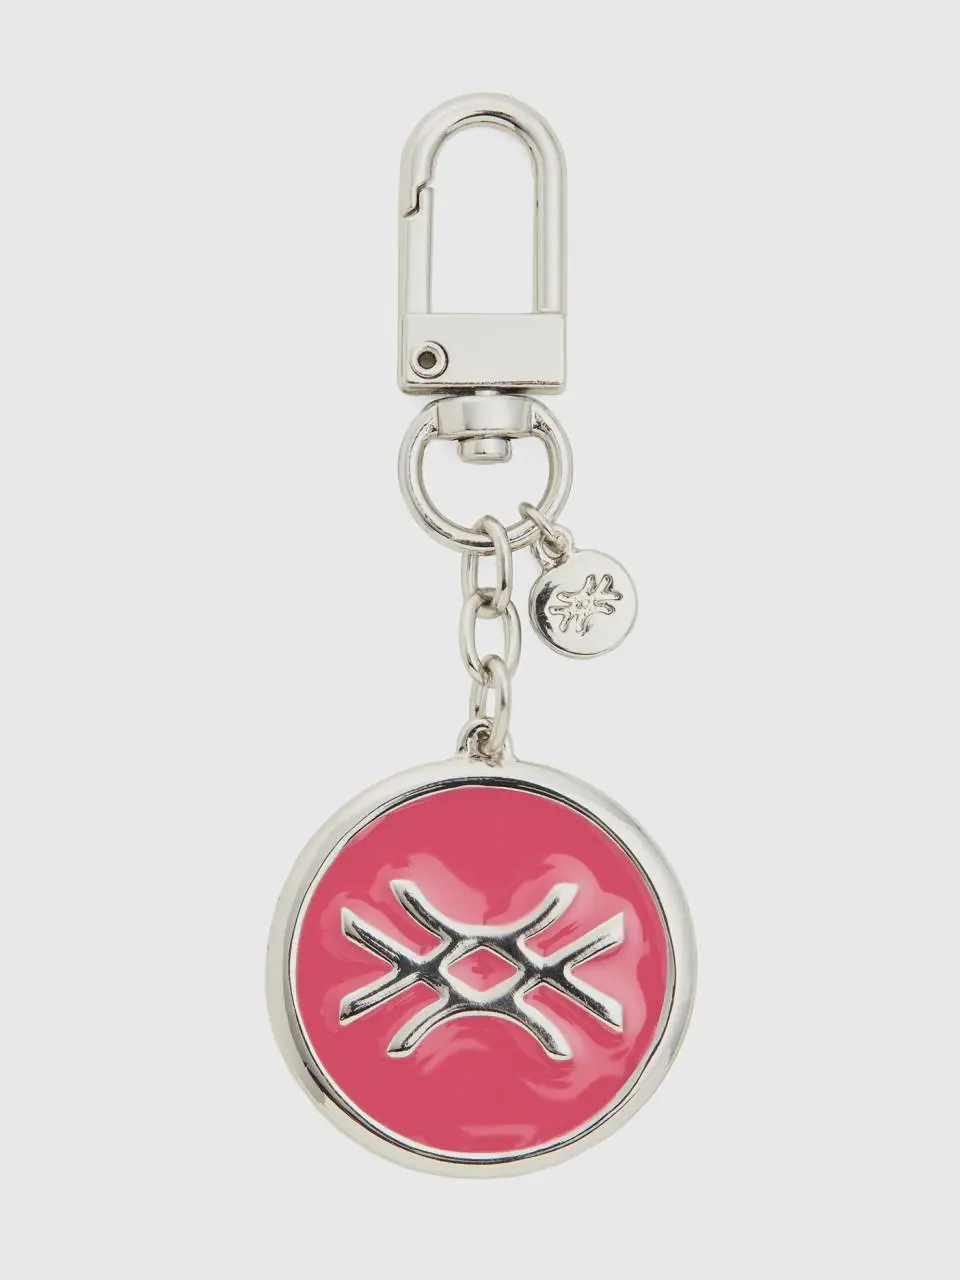 Benetton silver keychain with pink pendant. 1